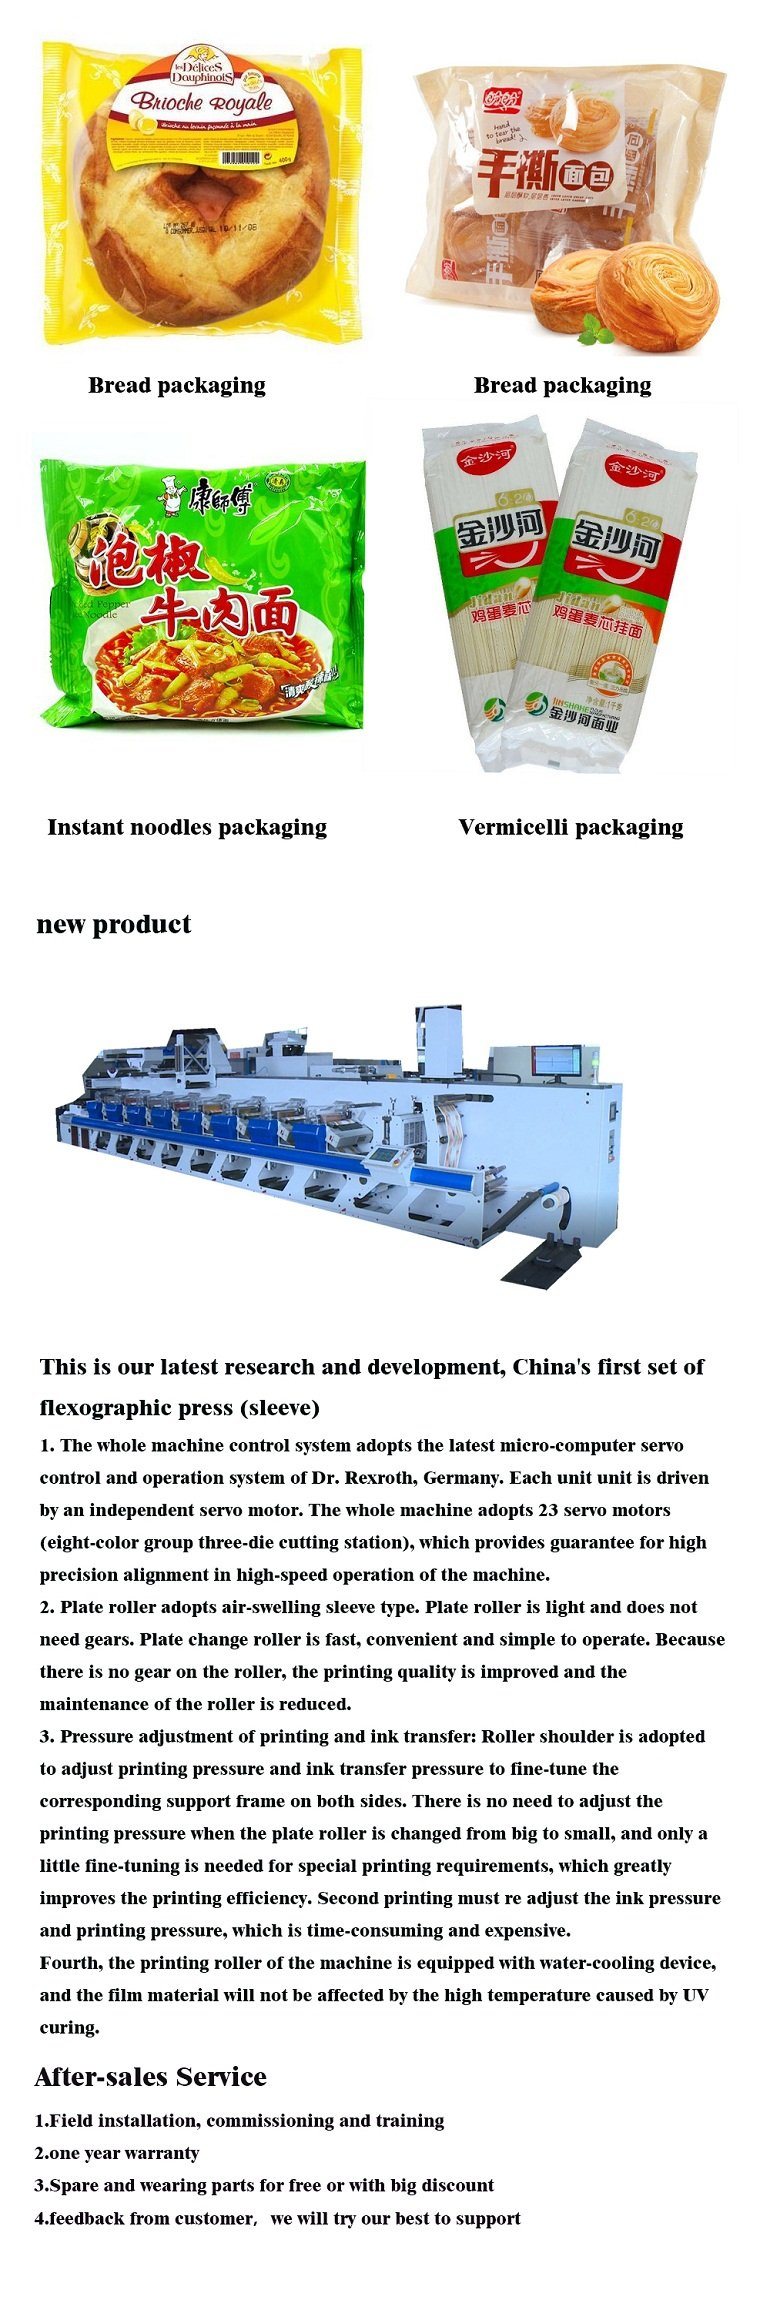 Automatic Powder Packaging Machine for Back Sealing Bags